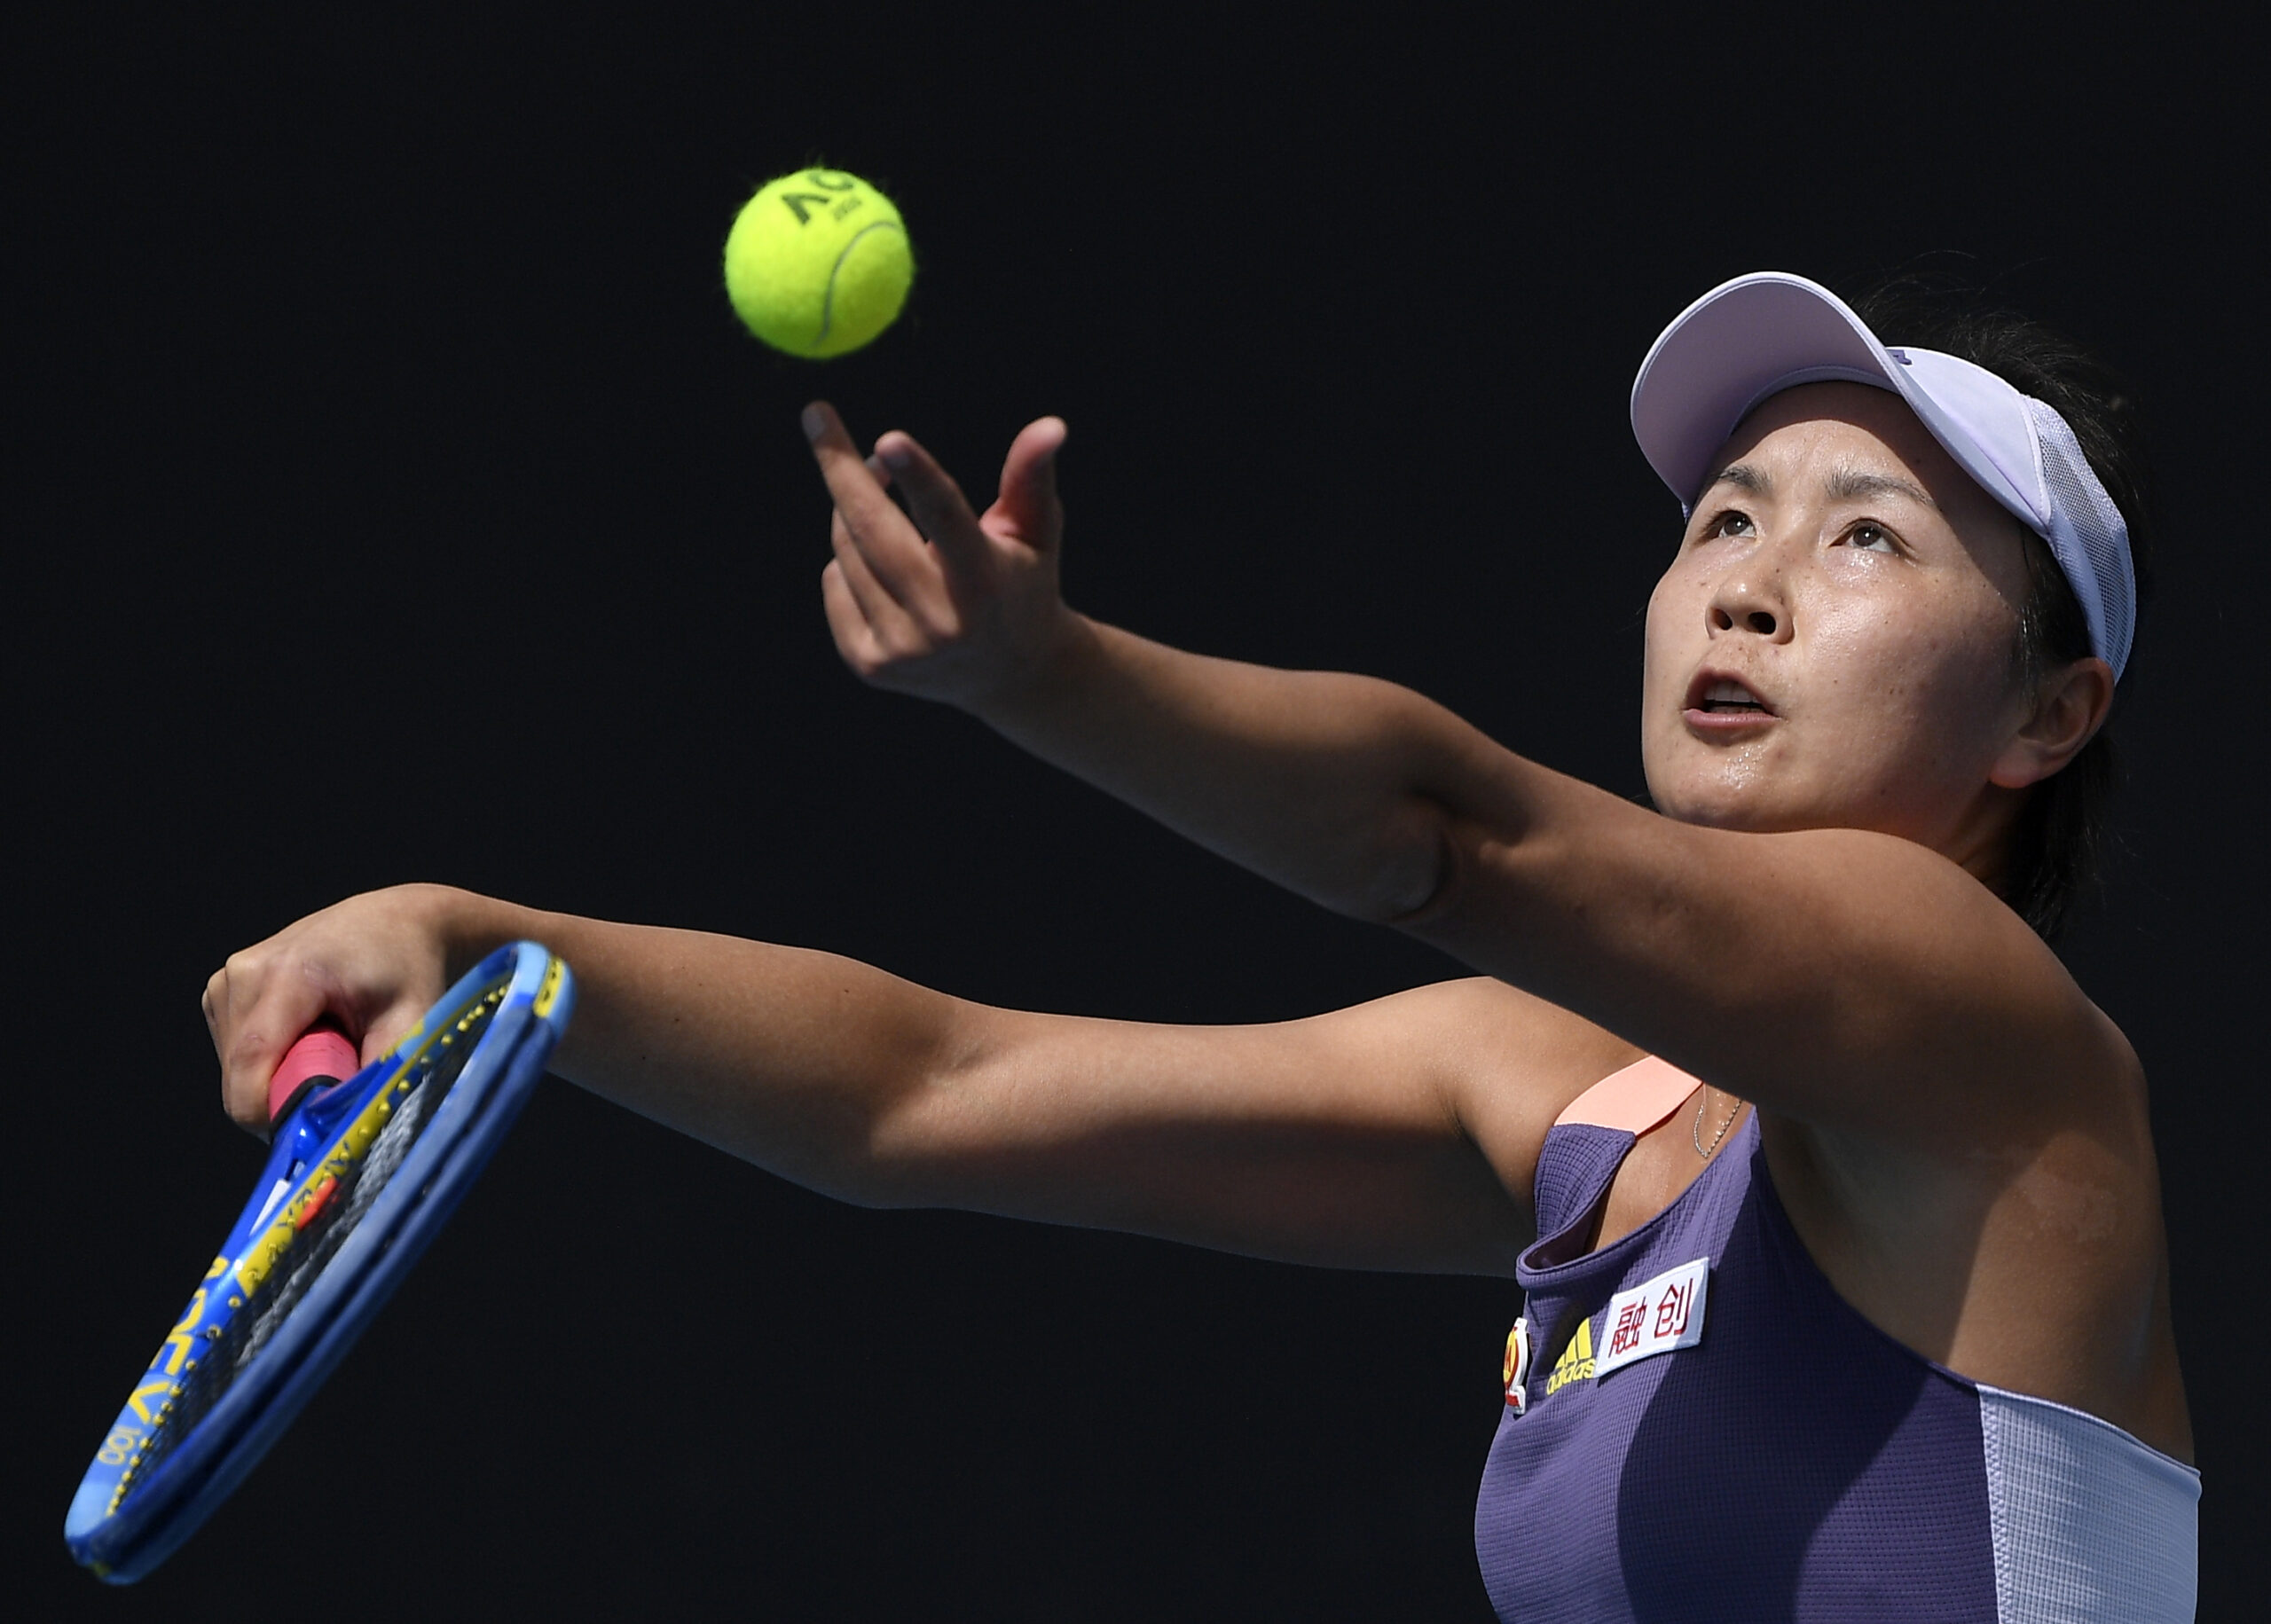 Peng Shuai Emerges at Olympics, Gives Controlled Interview